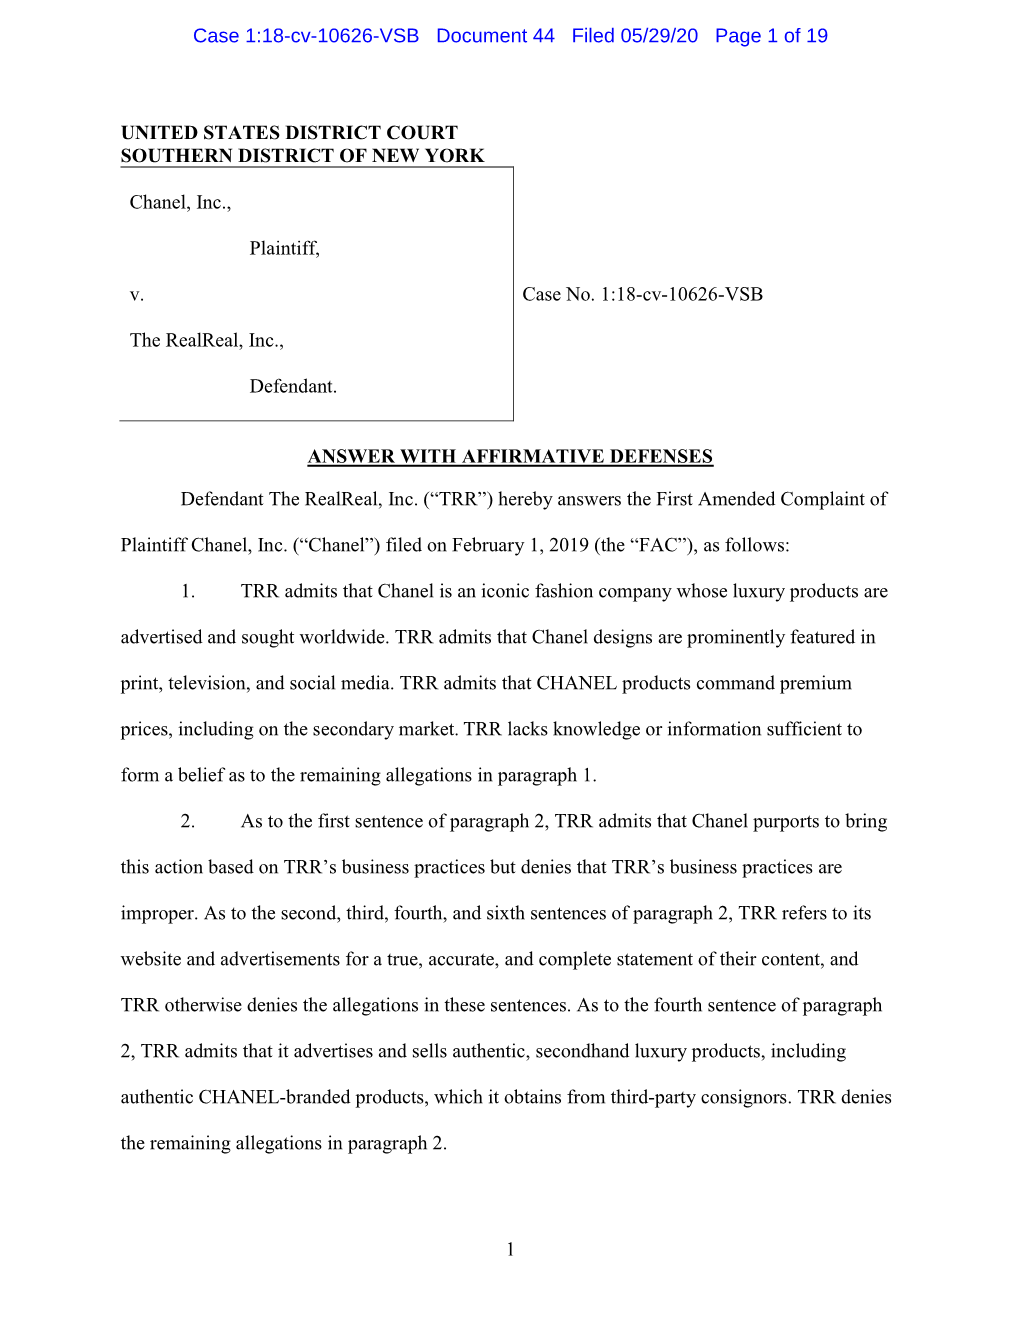 Case 1:18-Cv-10626-VSB Document 44 Filed 05/29/20 Page 1 of 19